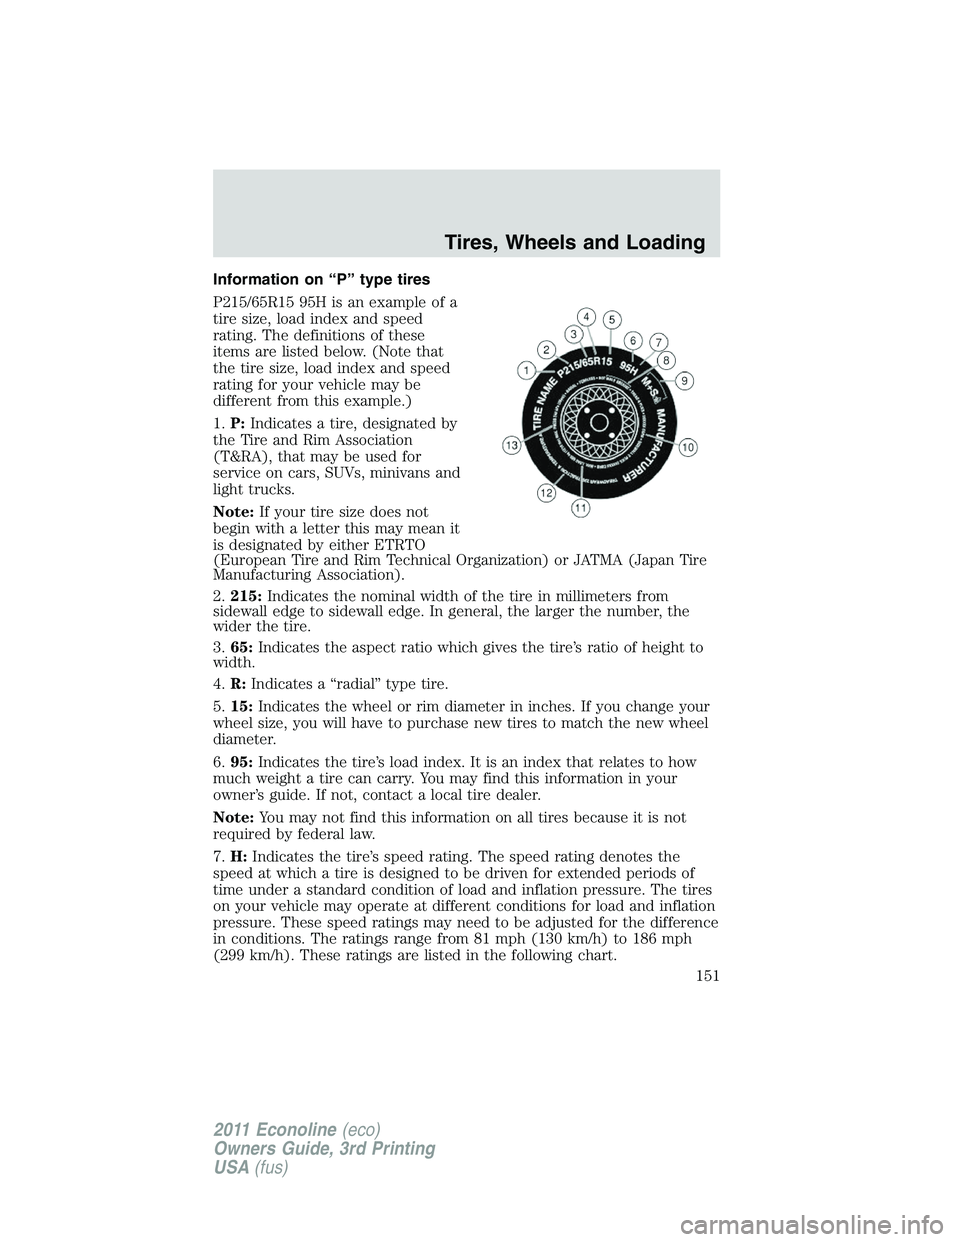 FORD E350 2011 Owners Manual Information on “P” type tires
P215/65R15 95H is an example of a
tire size, load index and speed
rating. The definitions of these
items are listed below. (Note that
the tire size, load index and sp